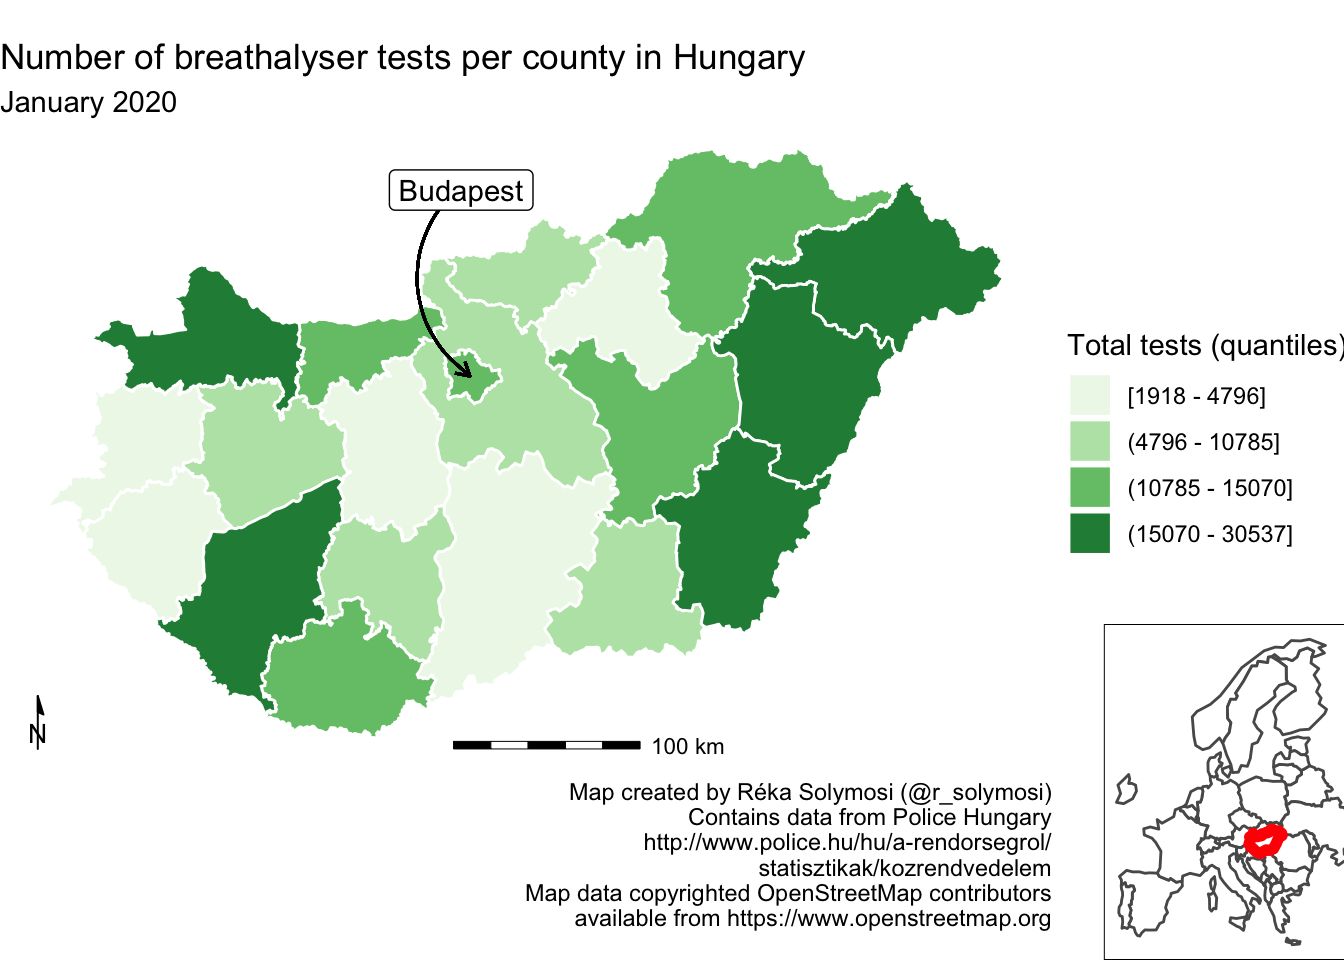 We return to the map from two figures ago, with all of its features present including the title, subtitle, 'Budapest' label and its arrow, attributions, north indicator, and scale indicator. The counties are still shaded green, and the legend still appears to the right. The addition this time is a box beneath the legend and to the right of the scale indicator and attributions. This box contains a small featureless map of Europe, with black borders, where Hungary has been outlined with a thicker red border.